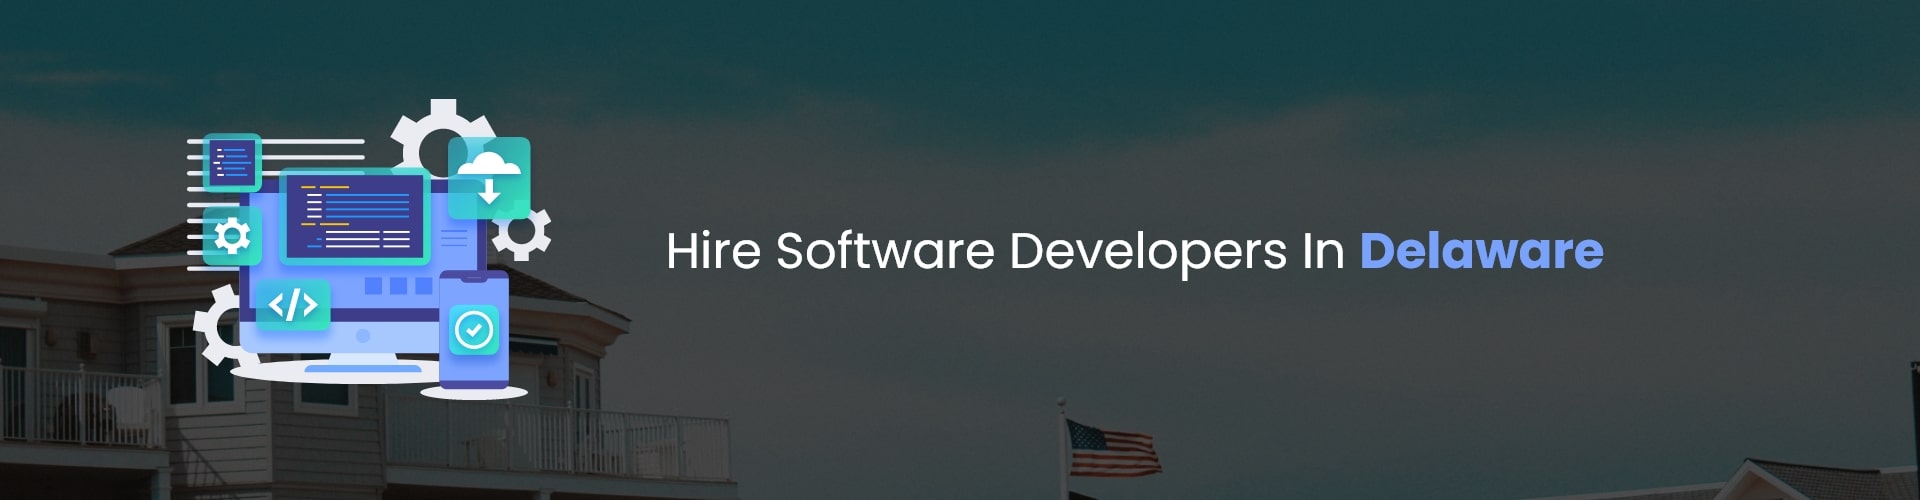 hire software developers in delaware